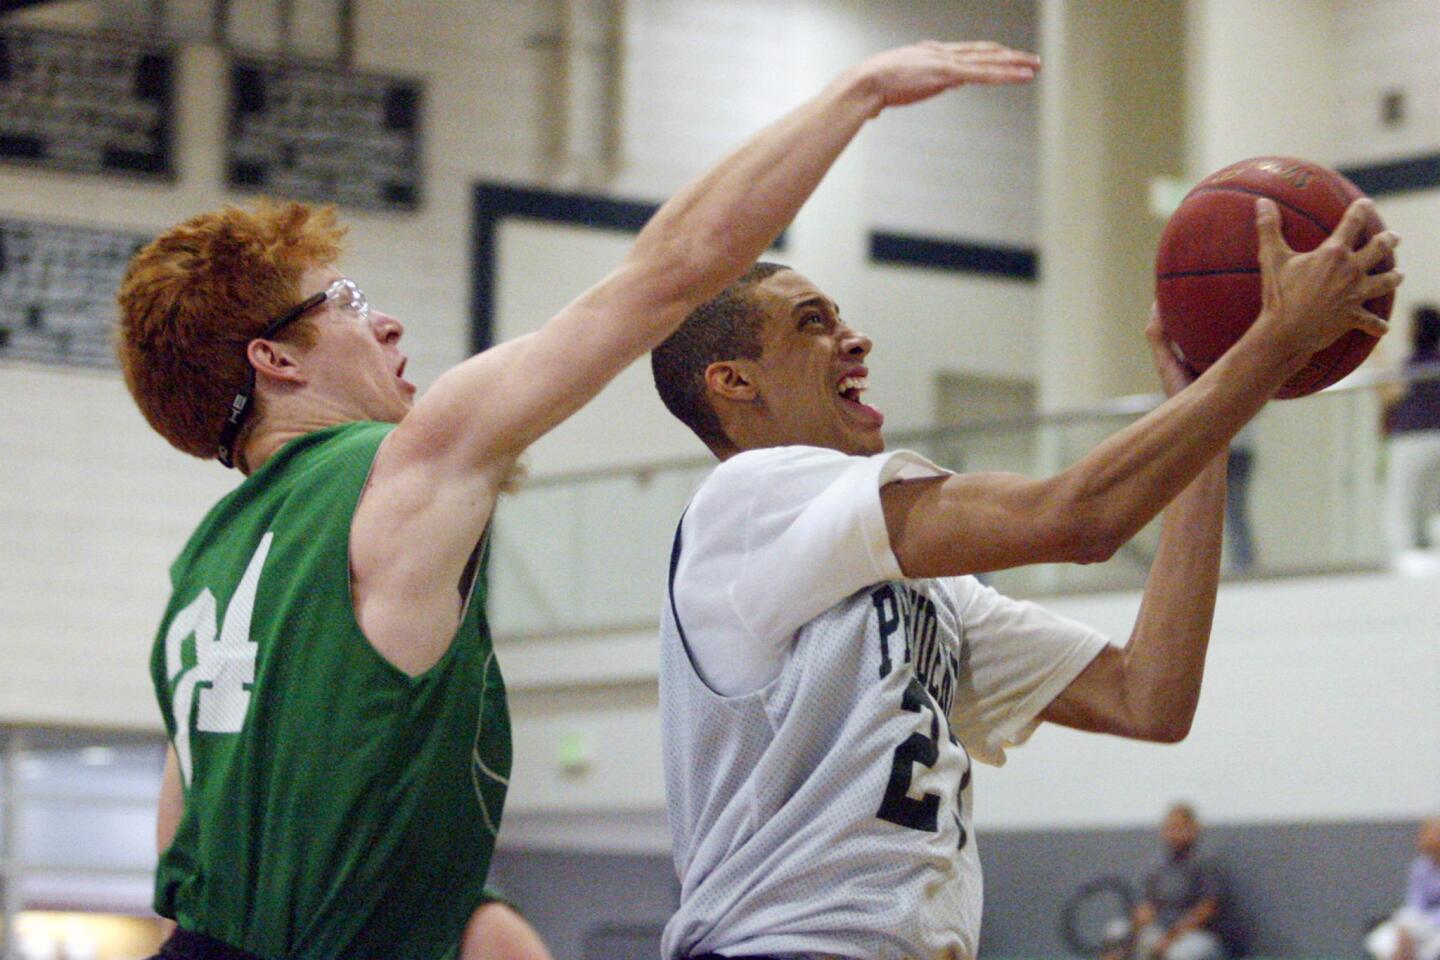 Providence's Christian Ware-Berry does a layup and is fouled by Reedley's Clay Kosinski during a game at Providence High School in Burbank on Saturday, July 21, 2012.